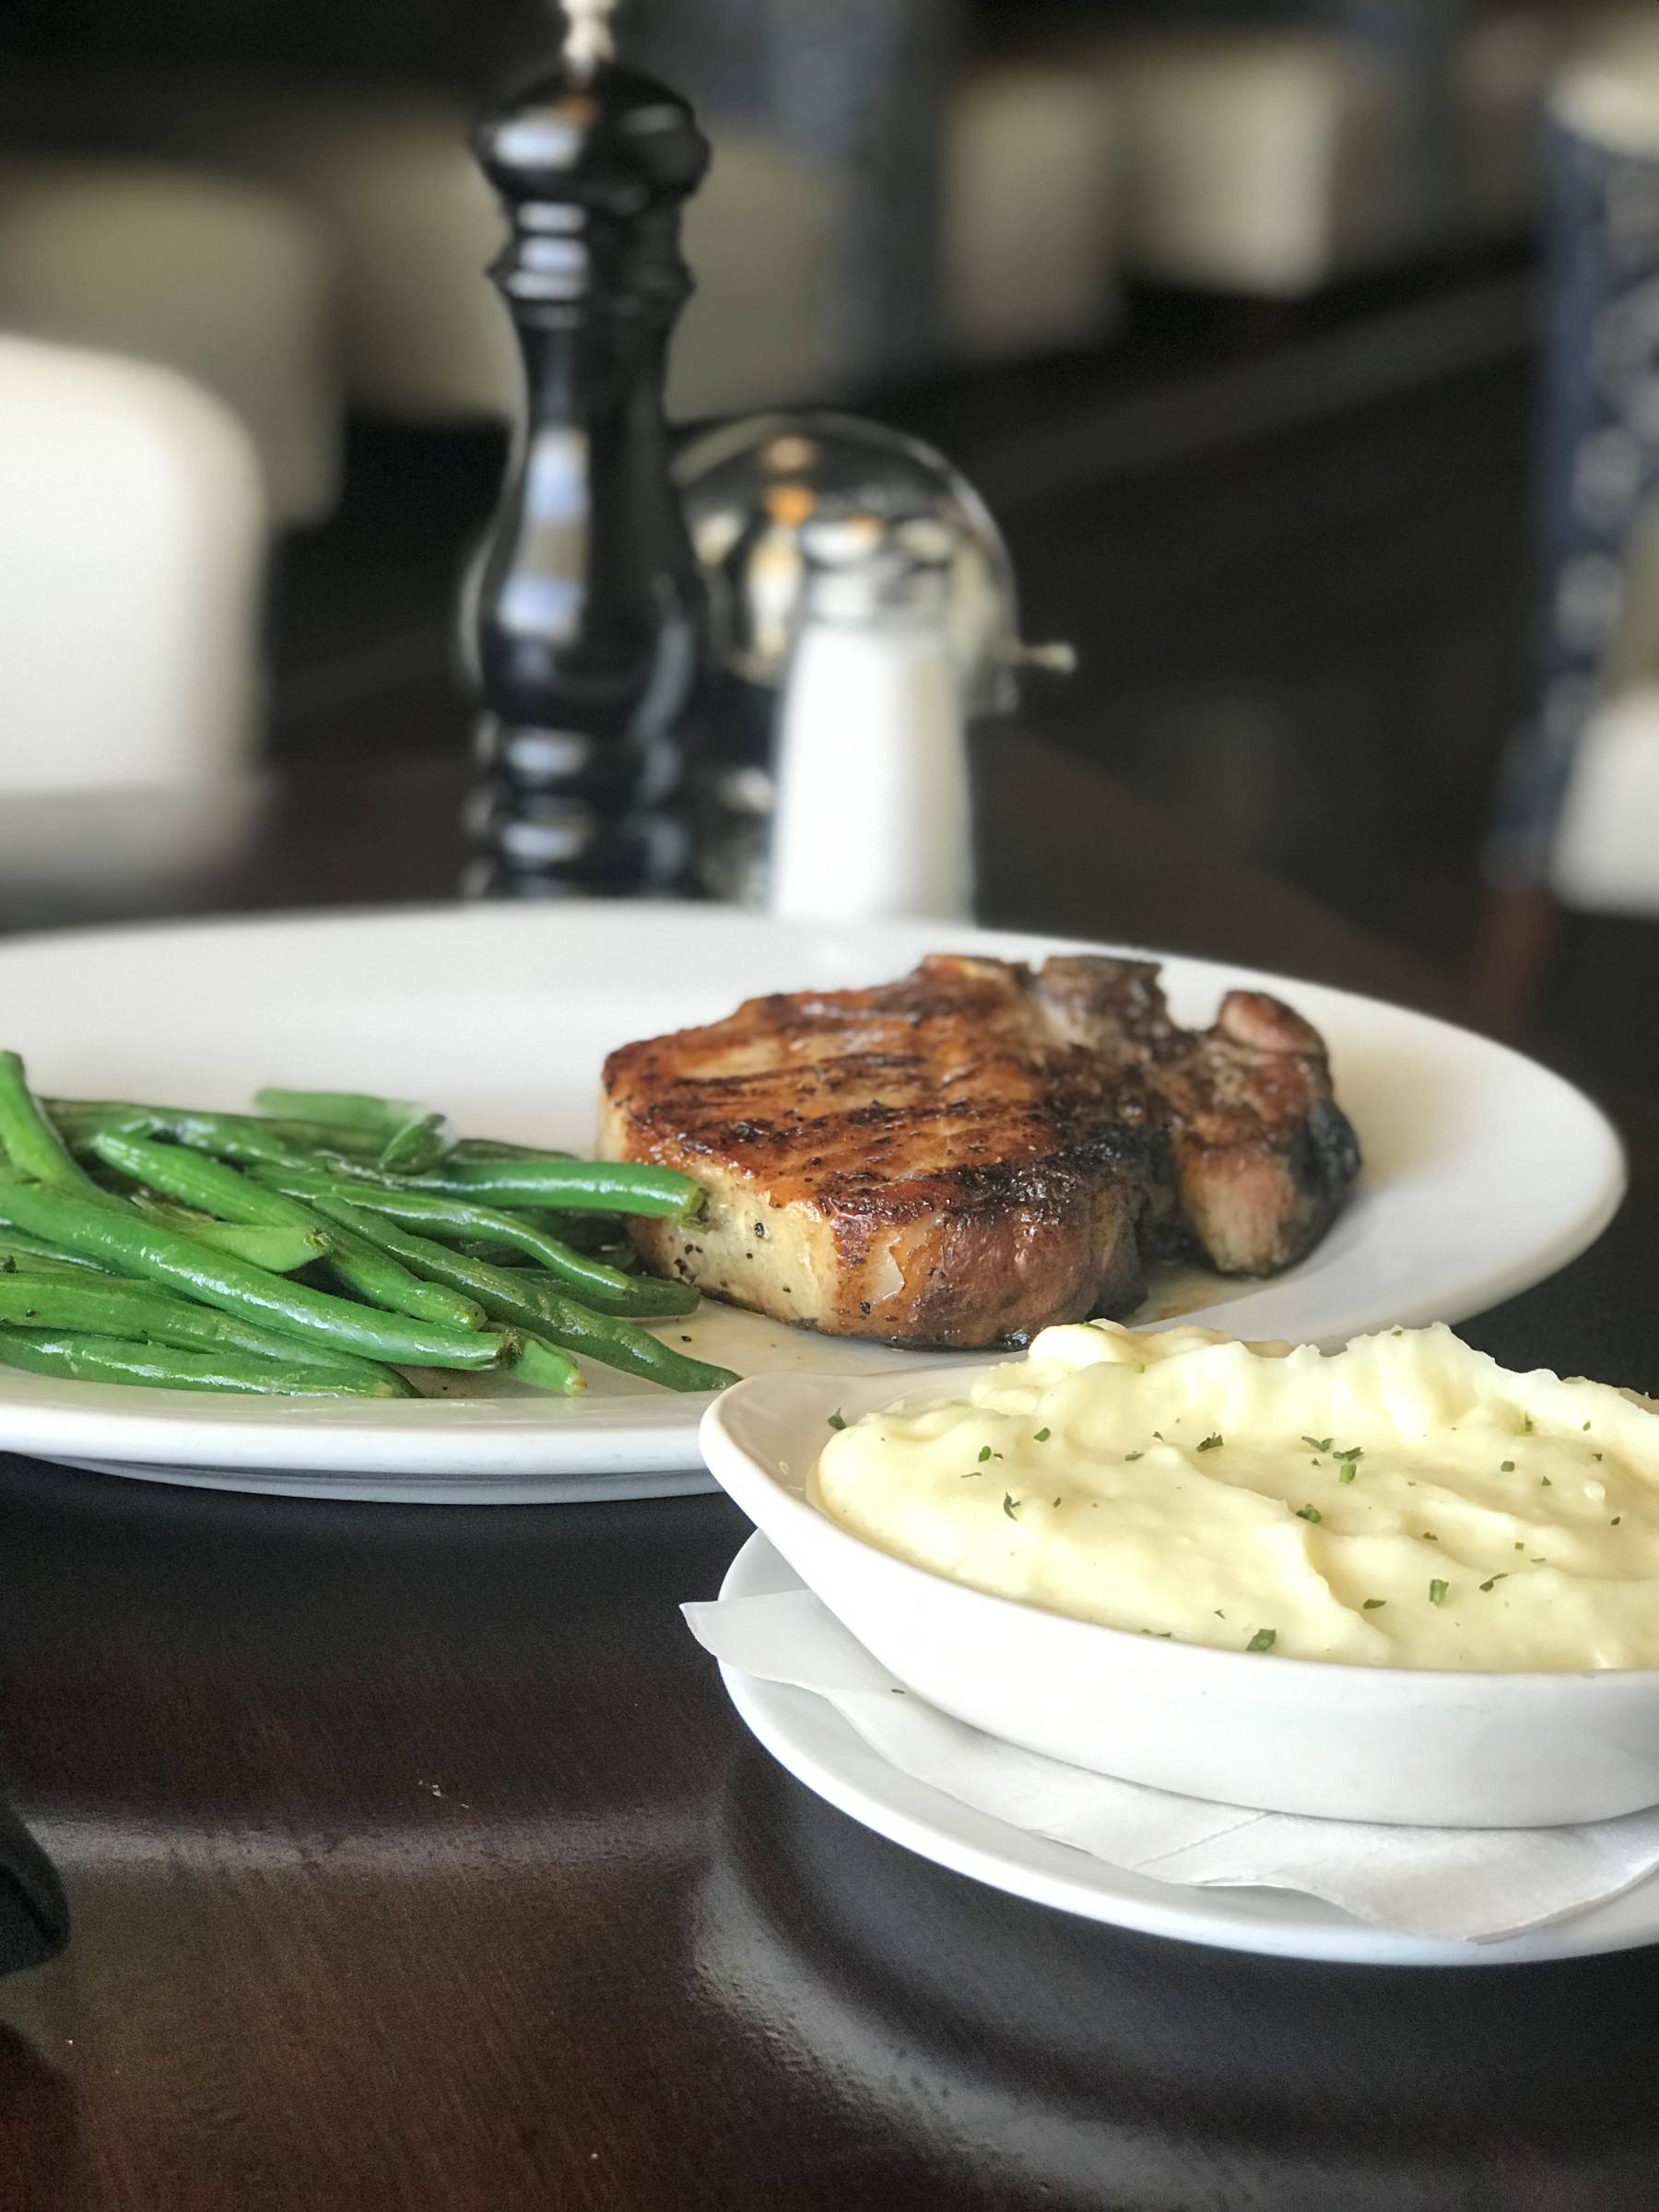 Glazed pork chop with green beans and mashed potatoes.